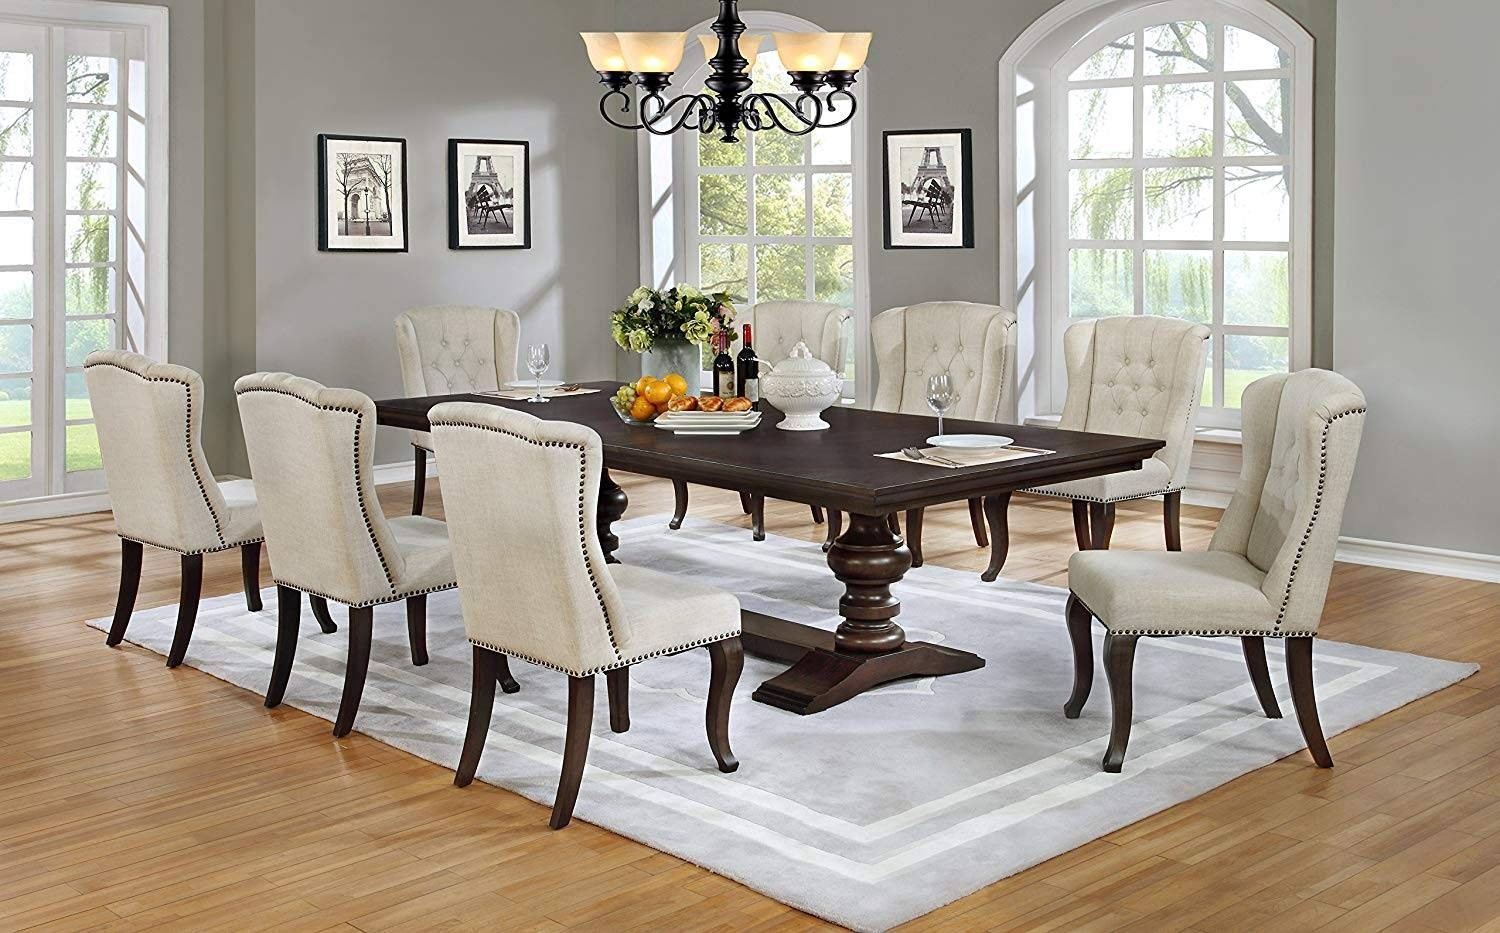 Quality Dining Room Set Beautiful Top Sets Round Tables intended for sizing 1500 X 933